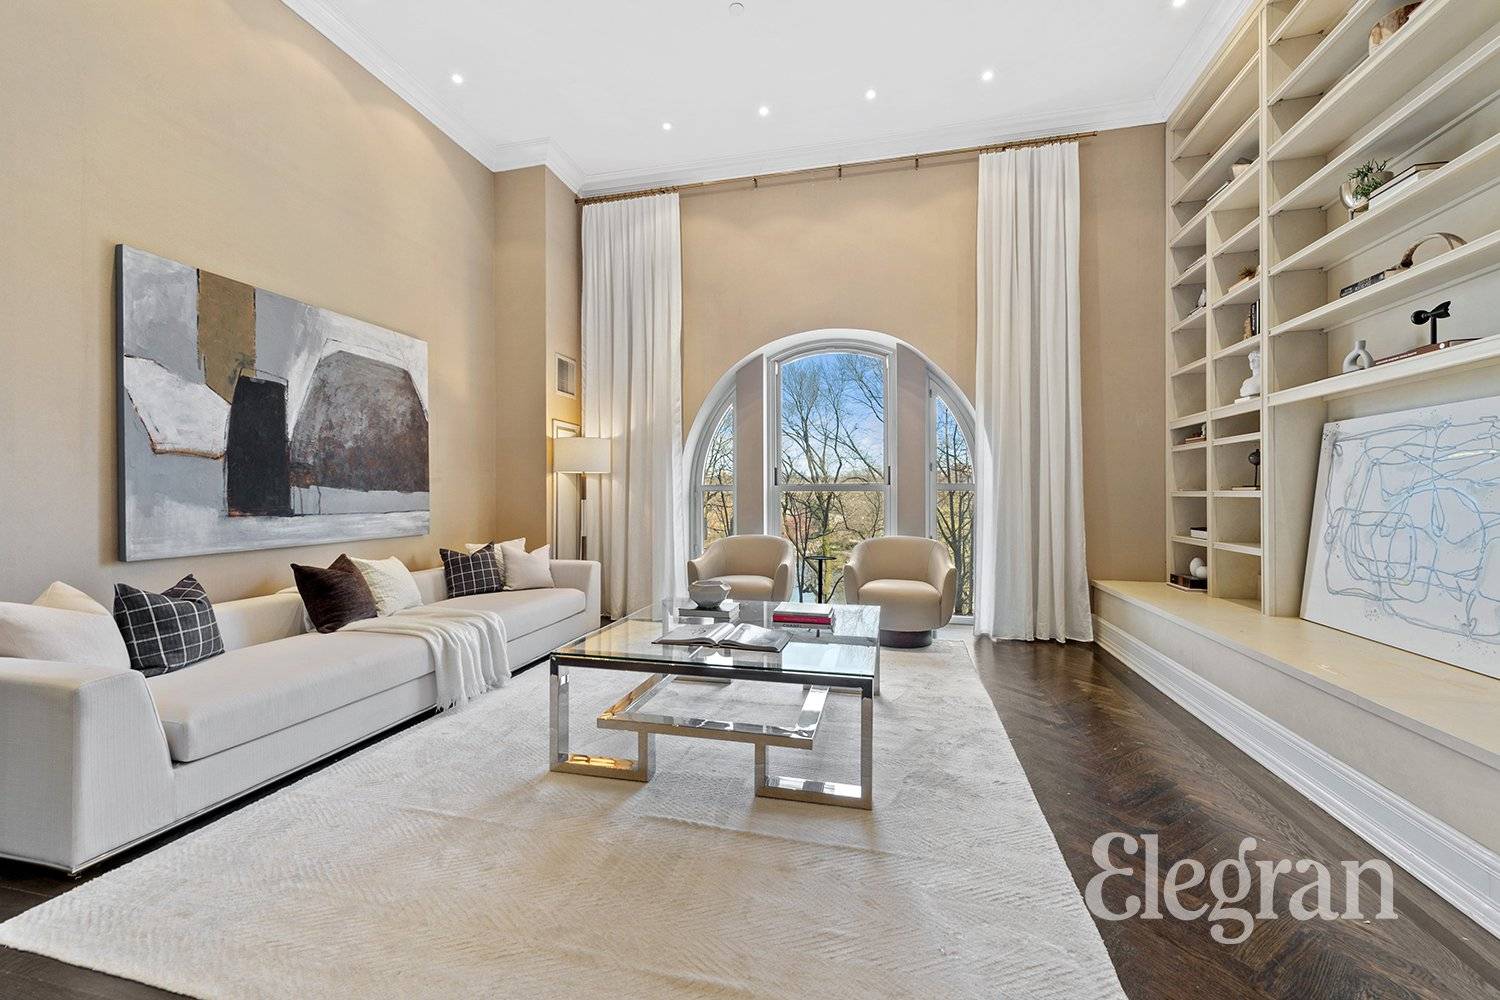 Breathtaking Central Park views are all yours in this stunning home set within the world famous The Plaza private residences.